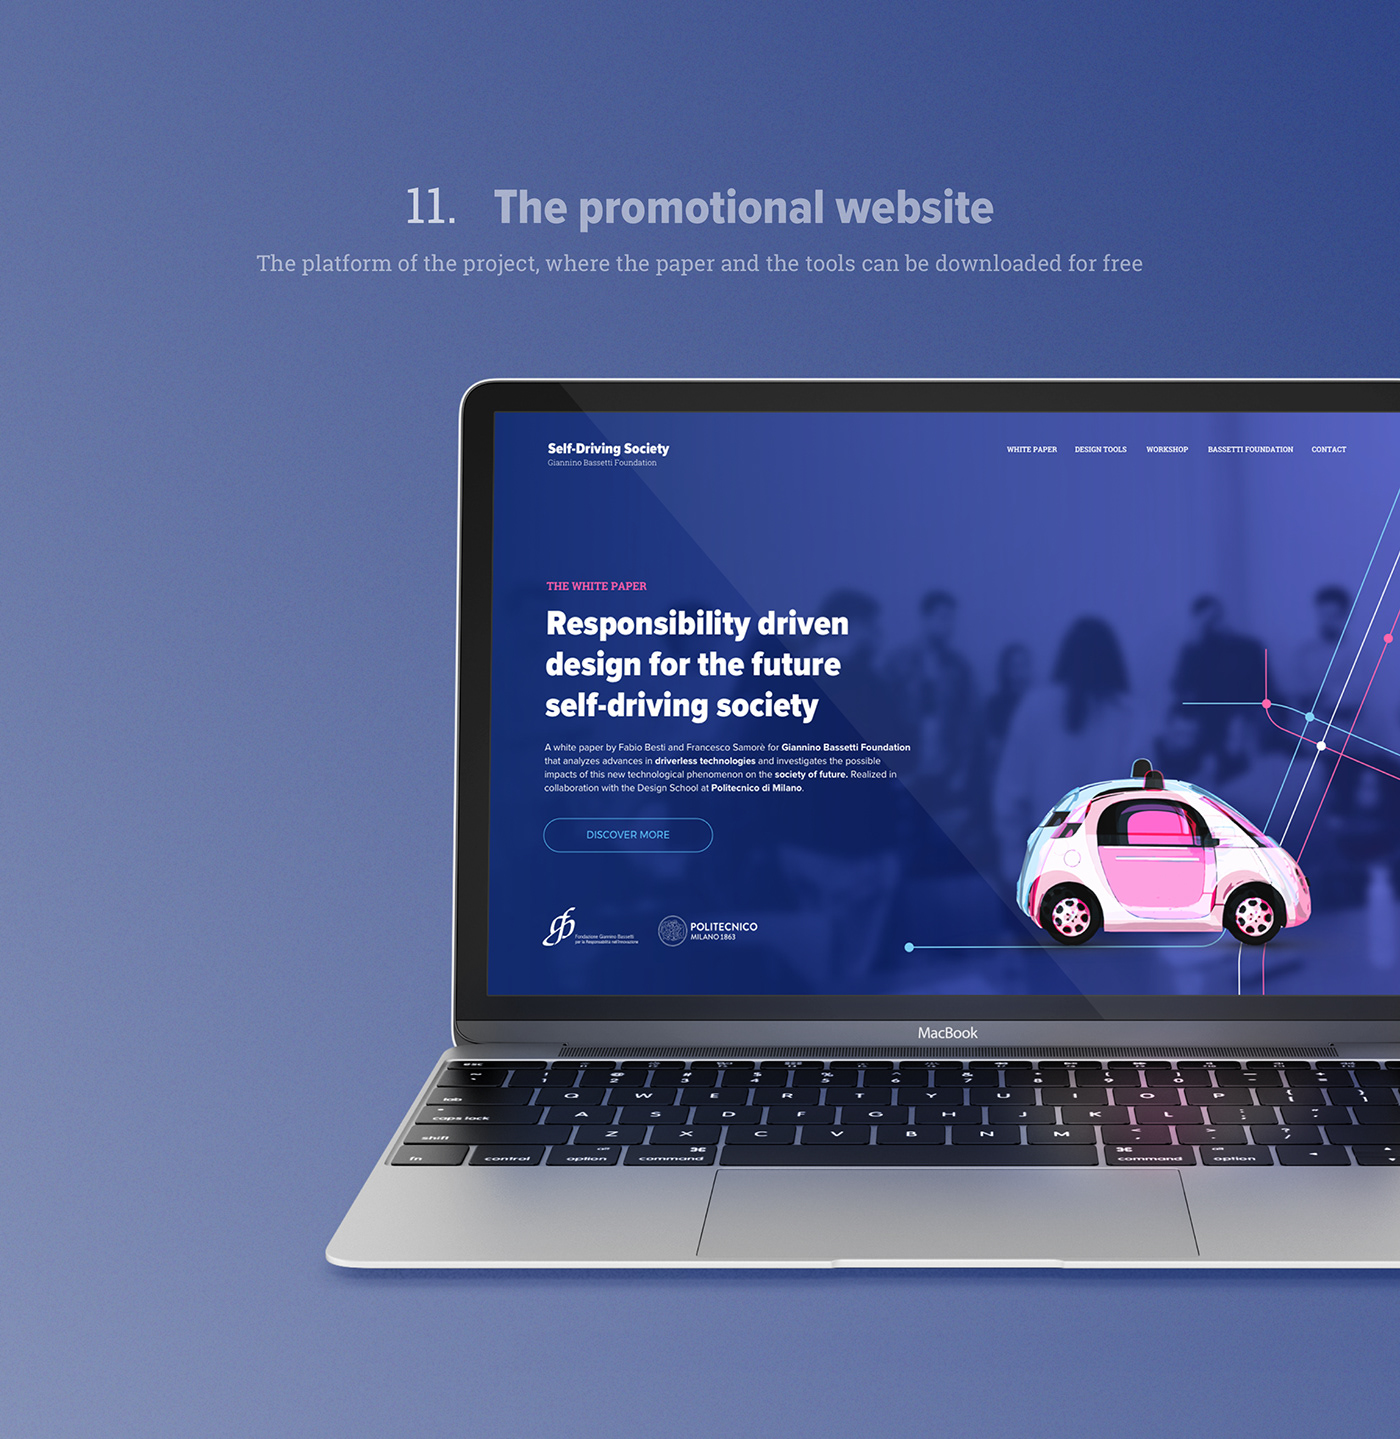 Macbook pro displaying the website design for the Self-Driving Society white paper